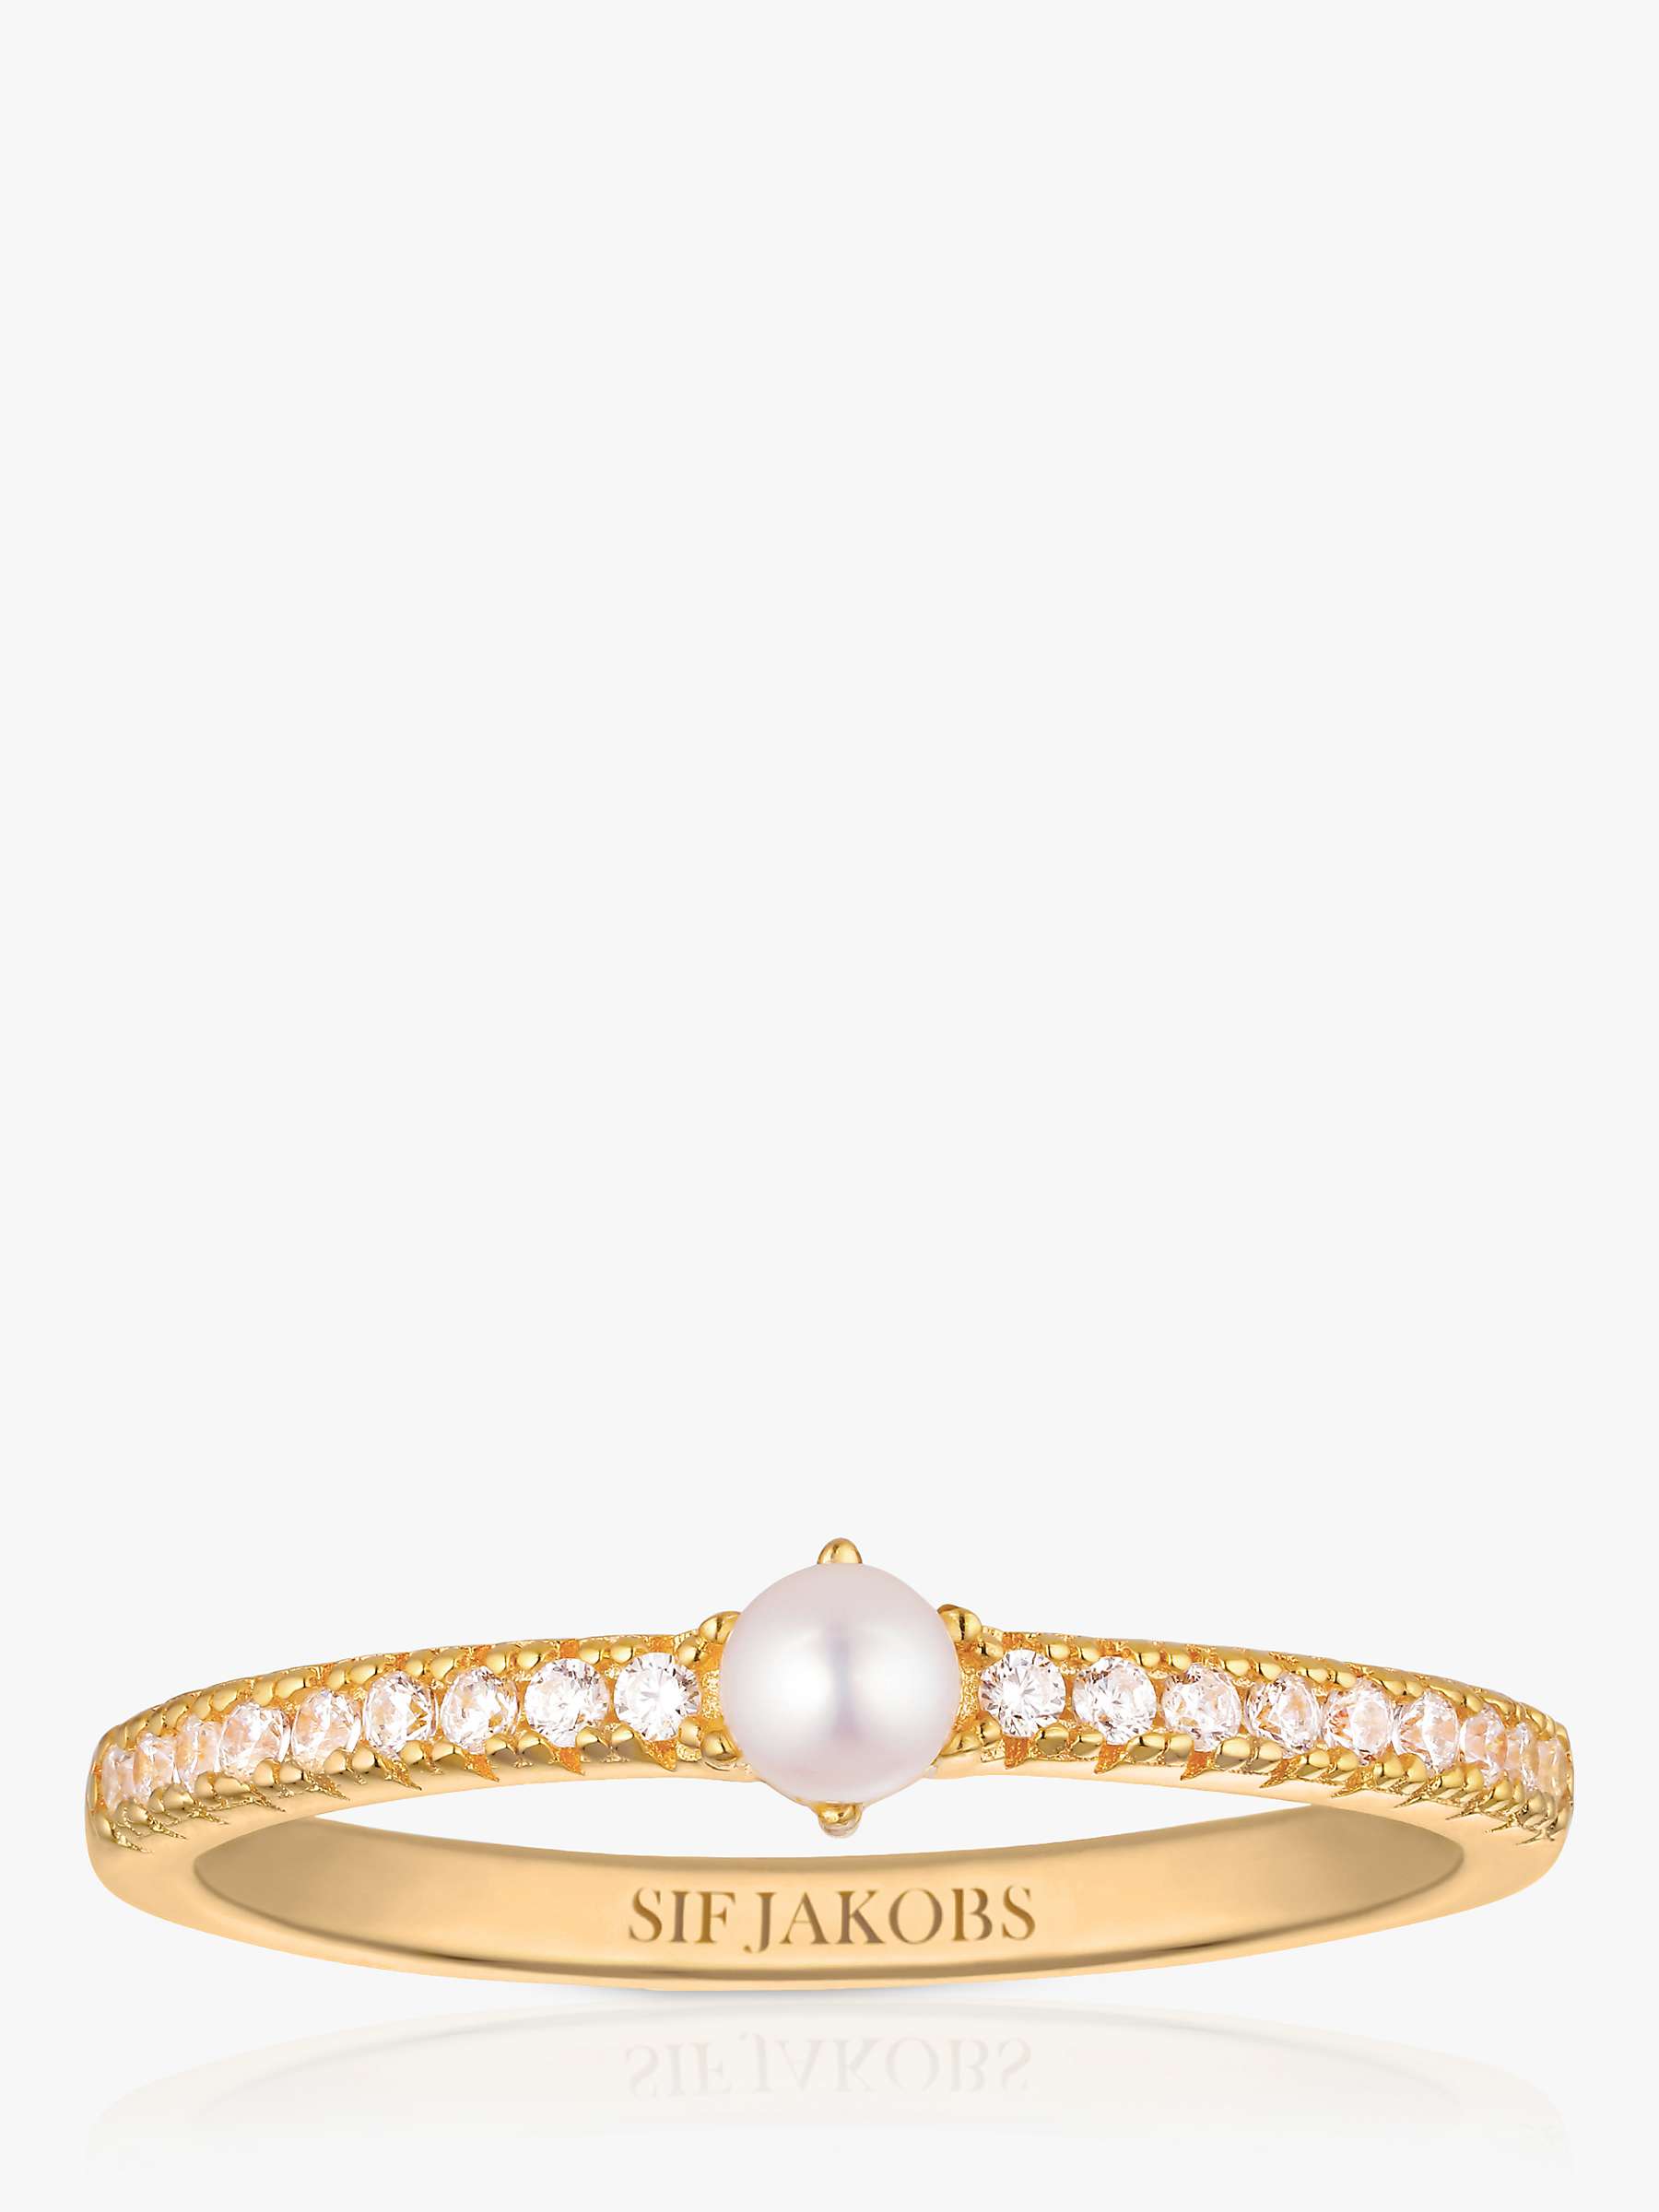 Buy Sif Jakobs Jewellery Pearl Cubic Zirconia Cocktail Ring, Gold Online at johnlewis.com